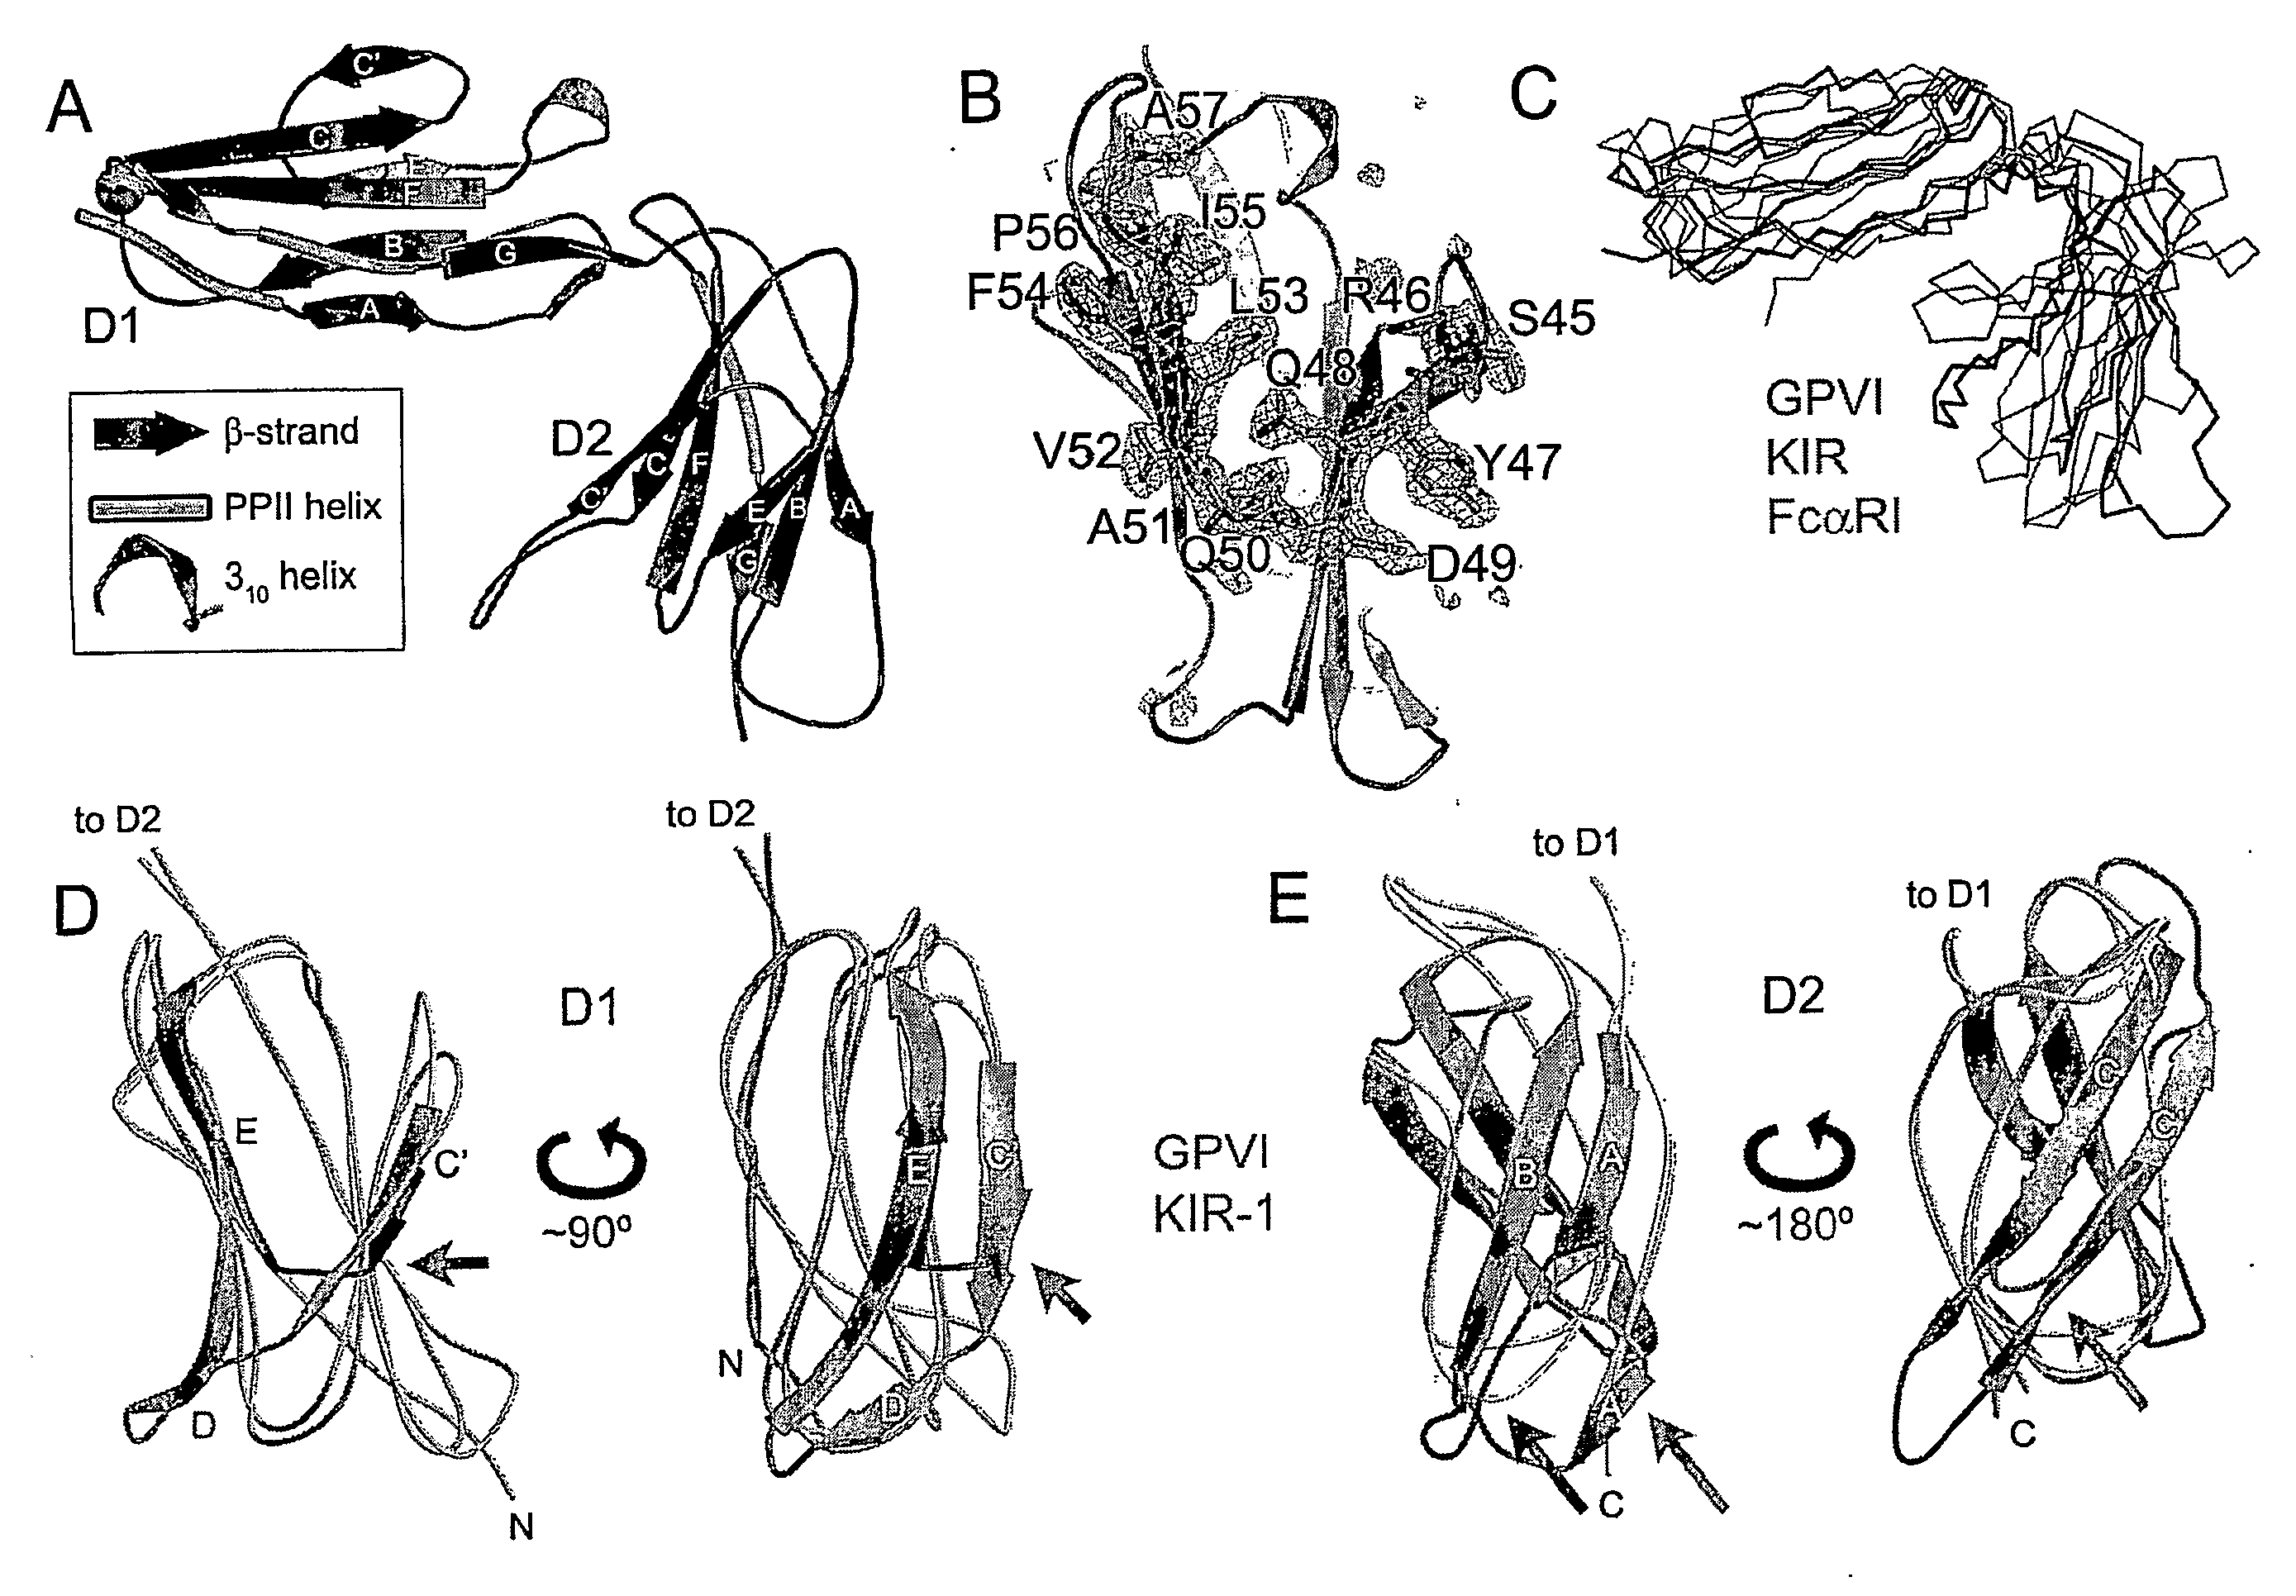 Crystal structure of human gpvi and applications thereof